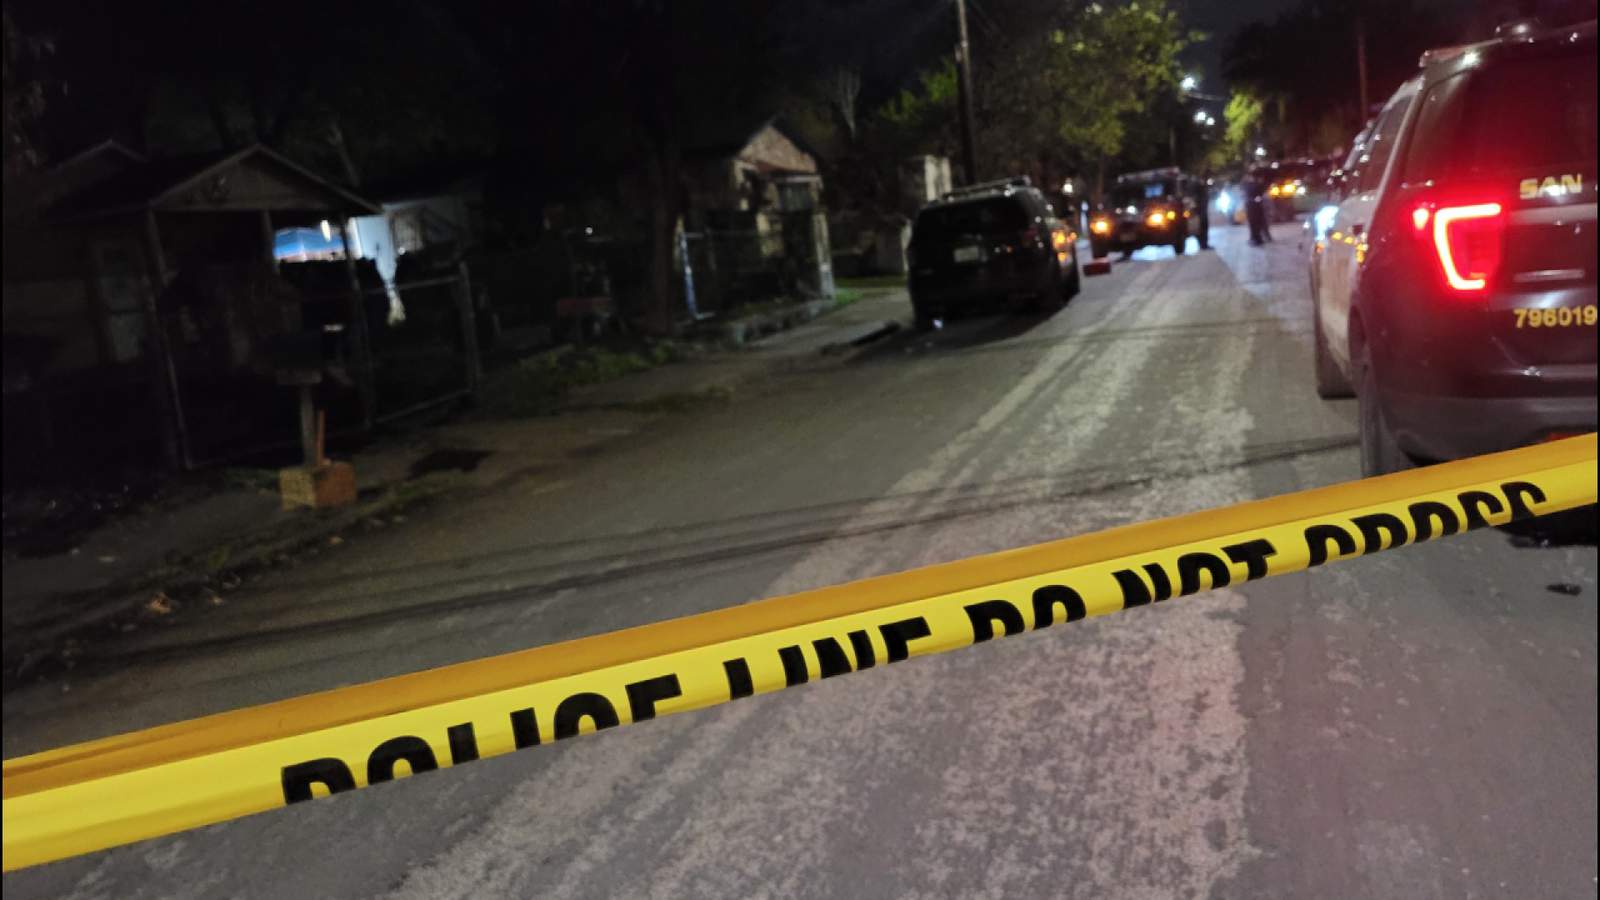 Police shoot, kill man armed with knife; Taser had no effect, SAPD chief says